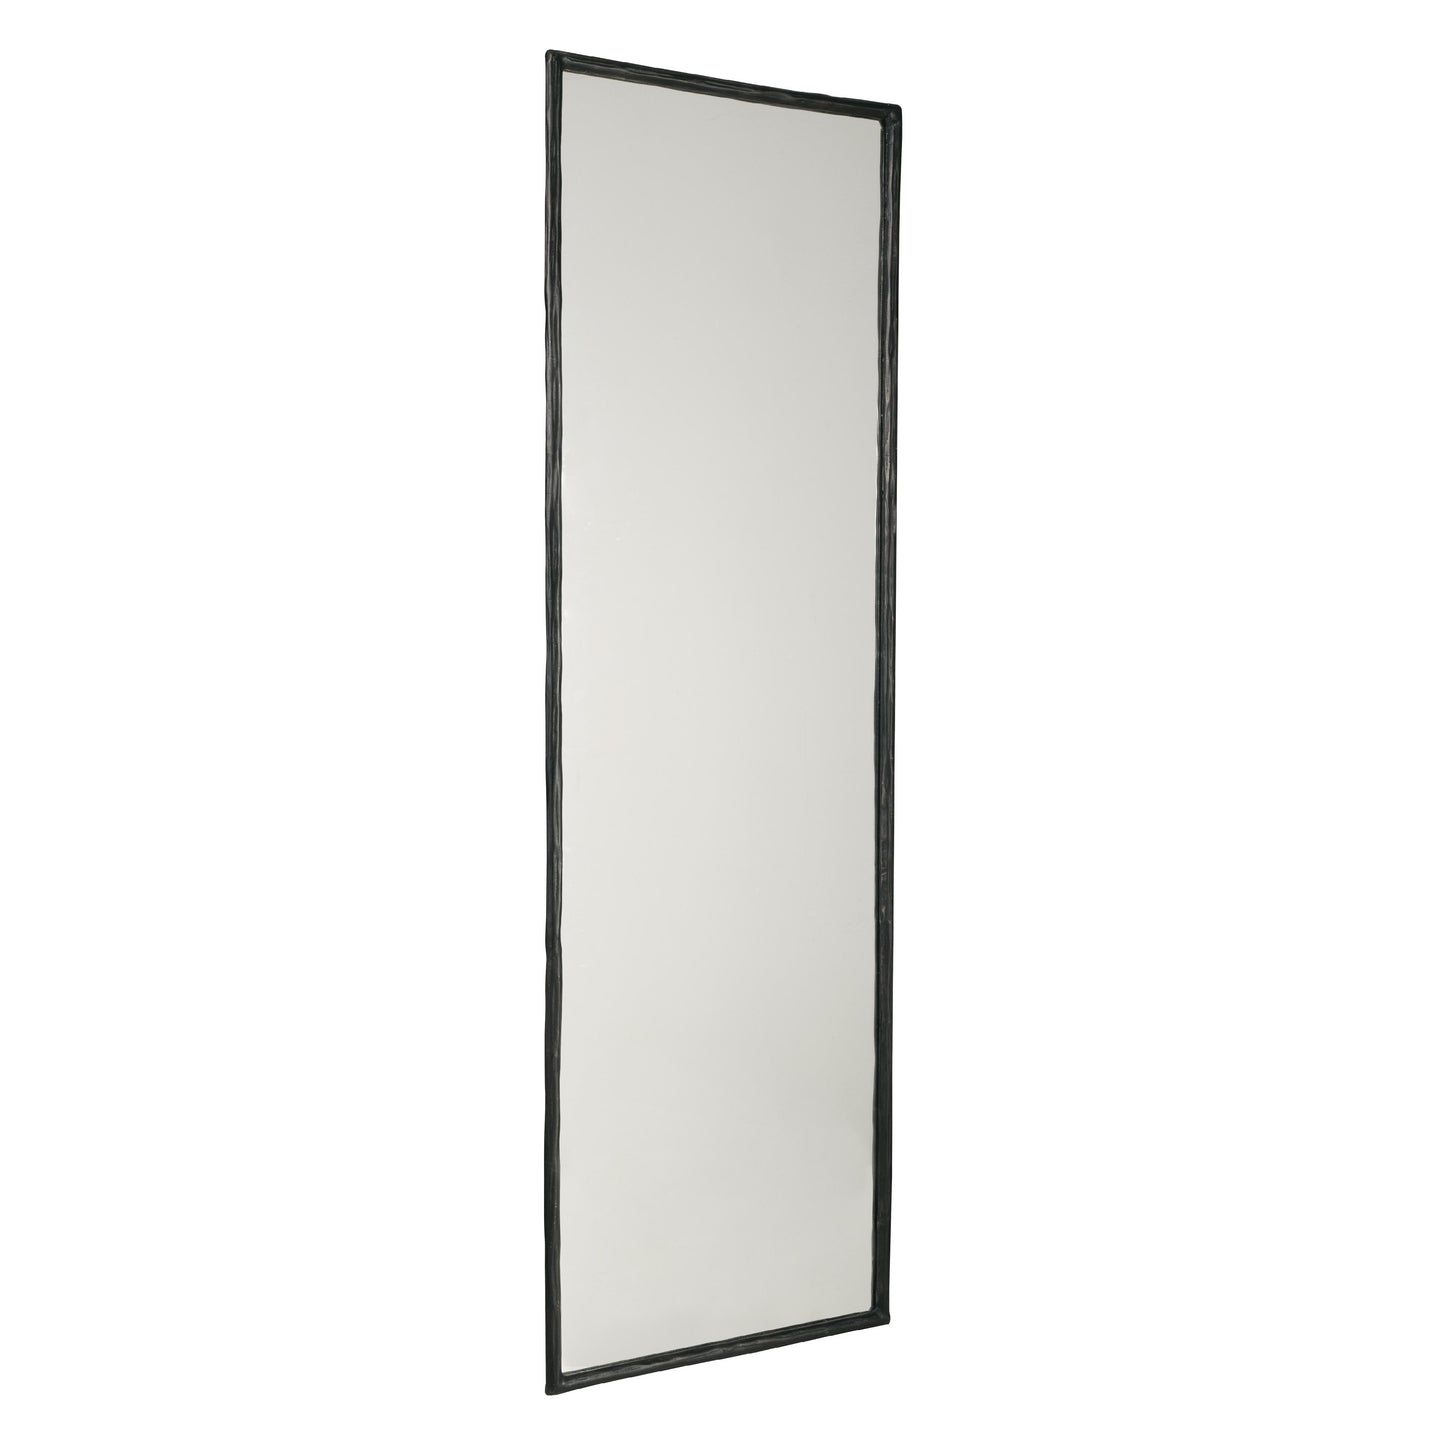 Signature Design by Ashley Ryandale Floorstanding Mirror A8010263 IMAGE 1